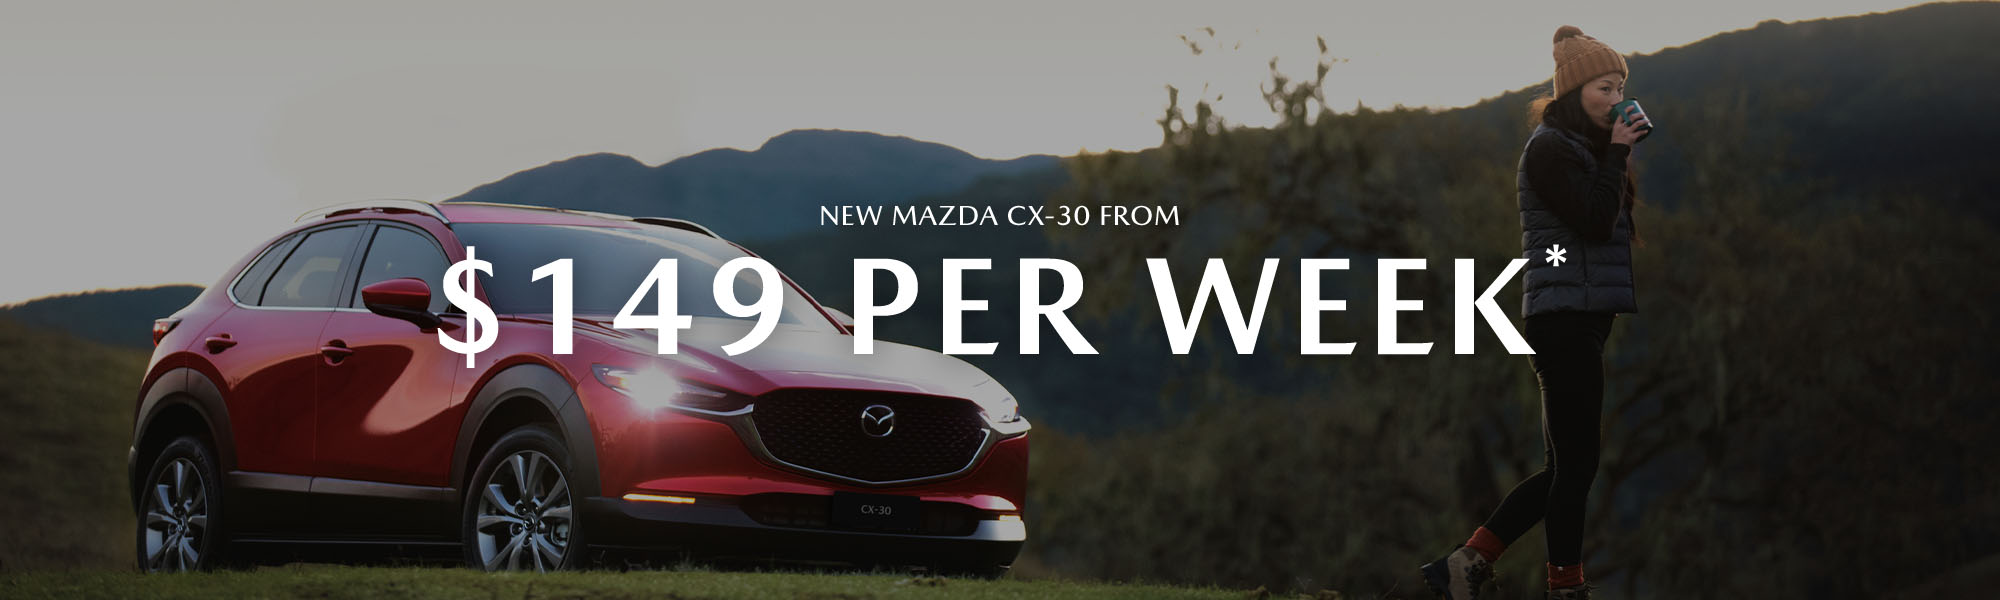 New Mazda CX-30 Activ from $145 per week